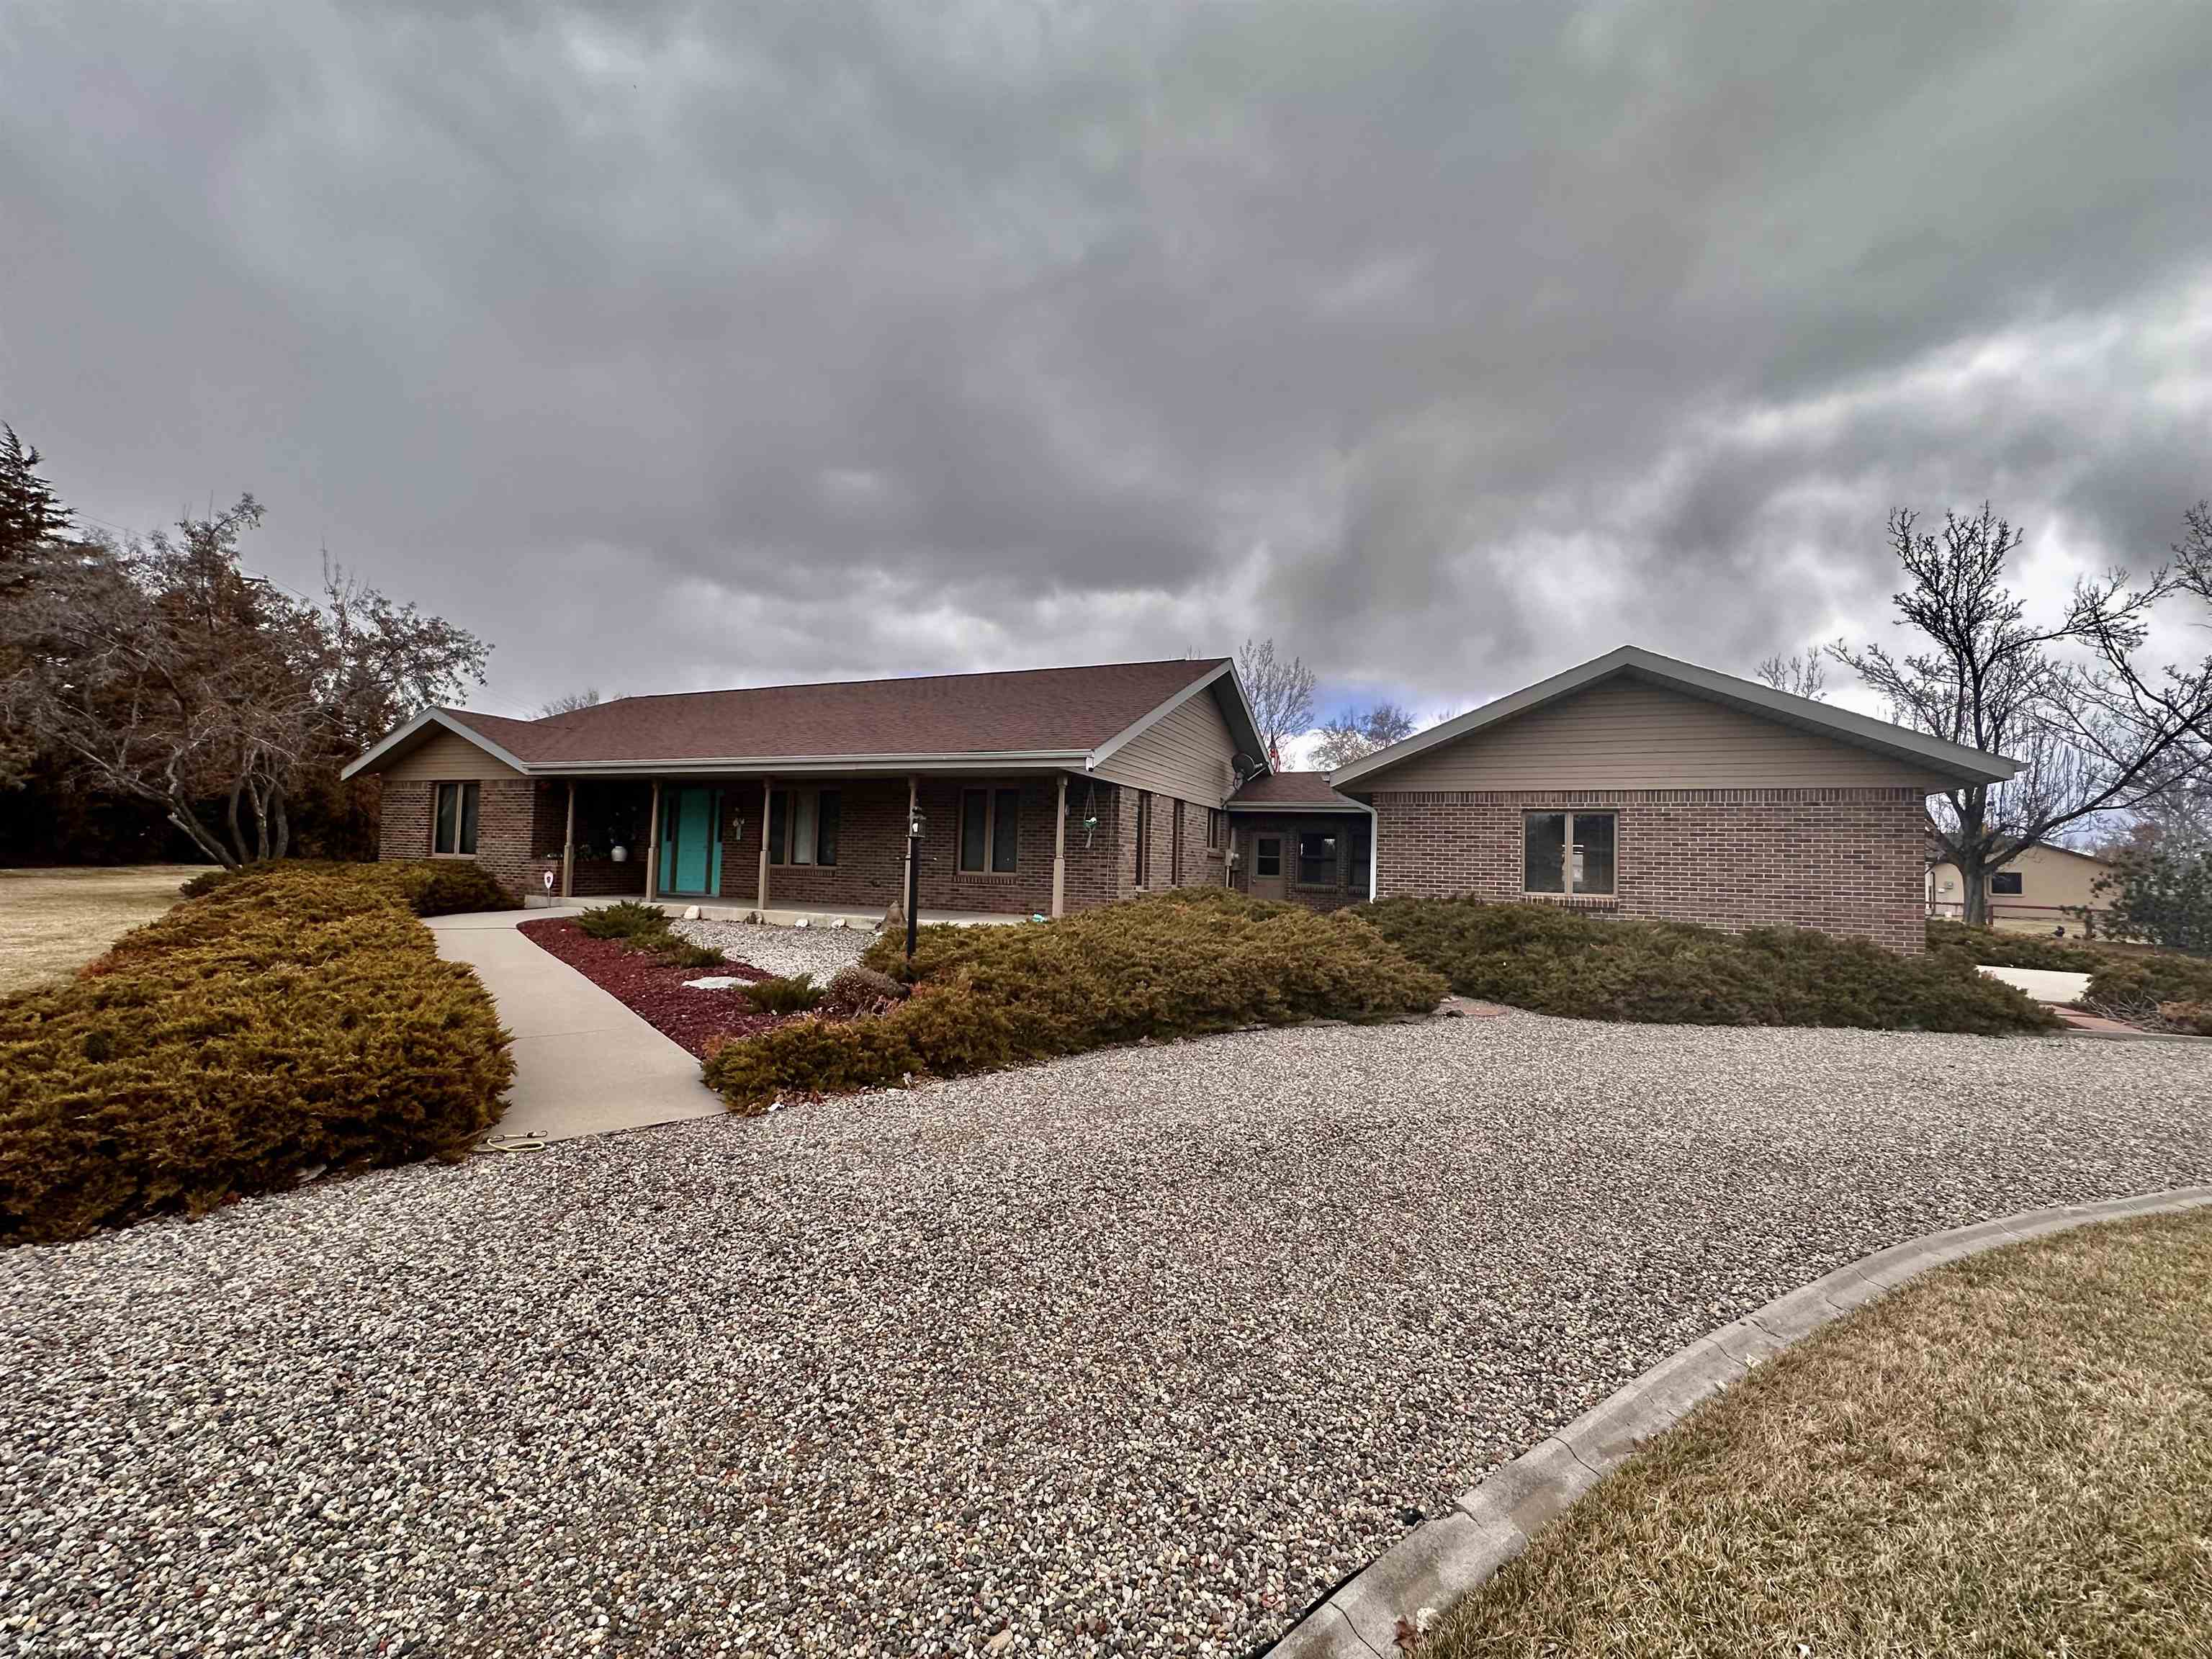 714 24 3/4 Road, Grand Junction, CO 81505